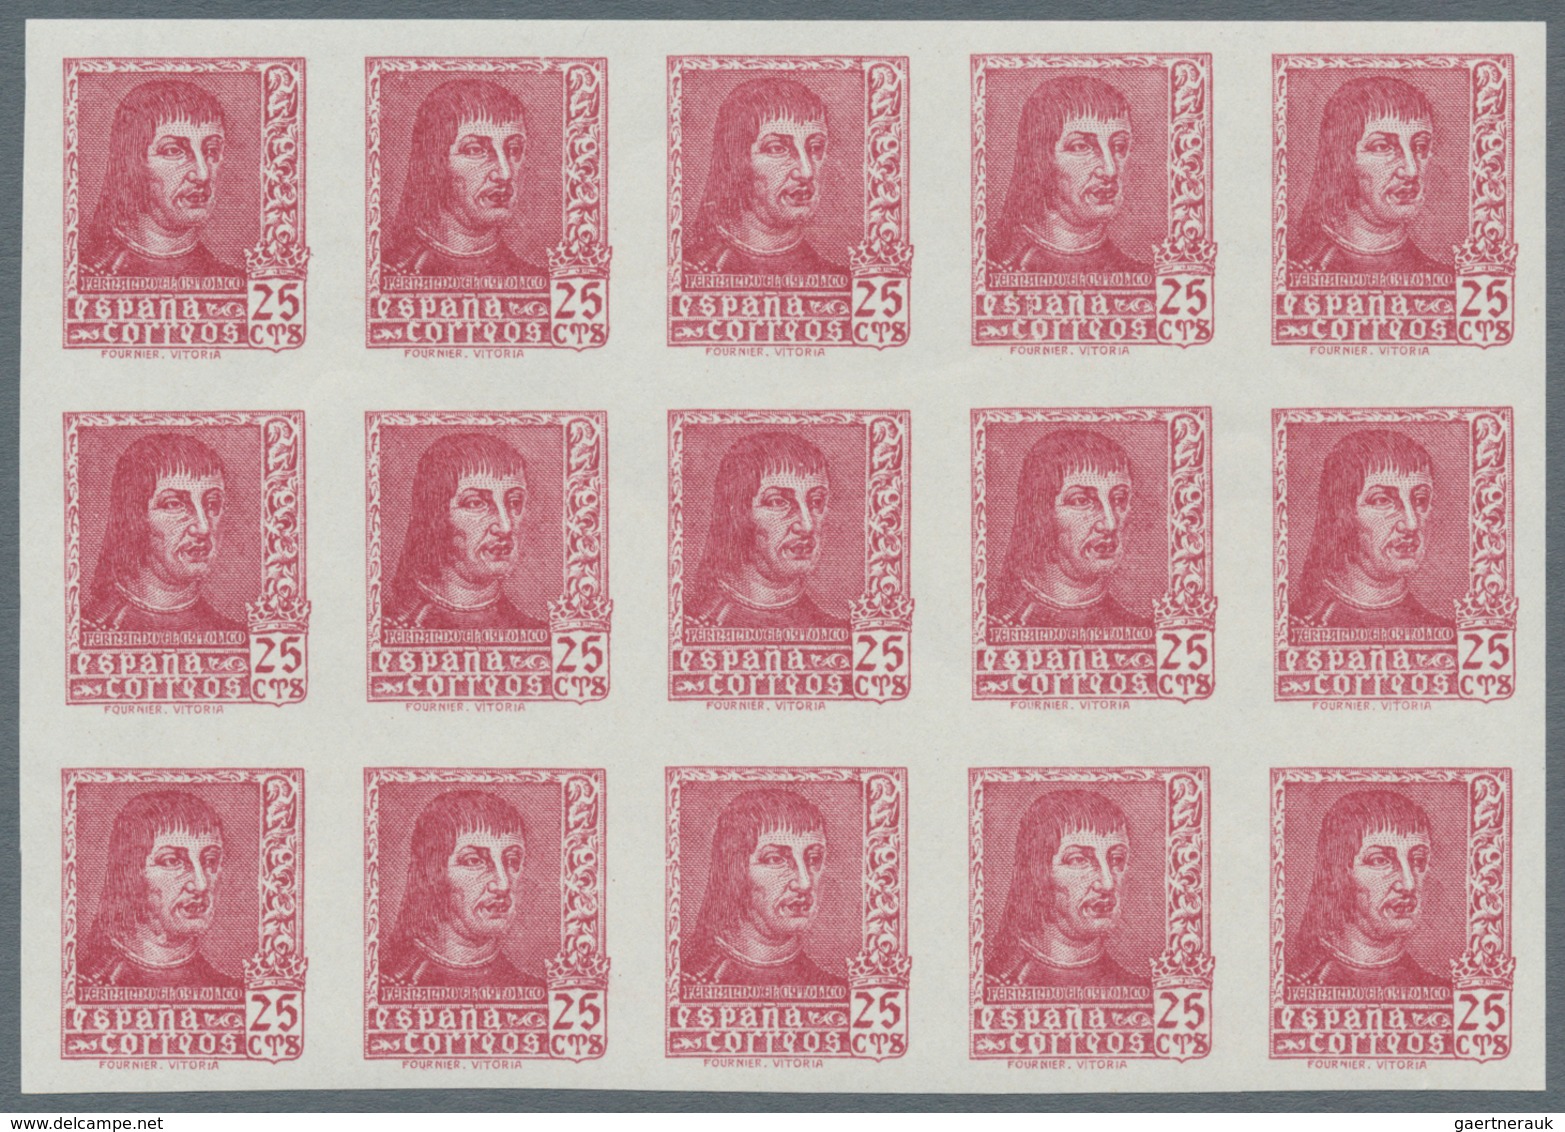 Spanien: 1938, Ferdinand II. Five Different Stamps Incl. Both Imprints Of 30c. In IMPERFORATED Block - Used Stamps